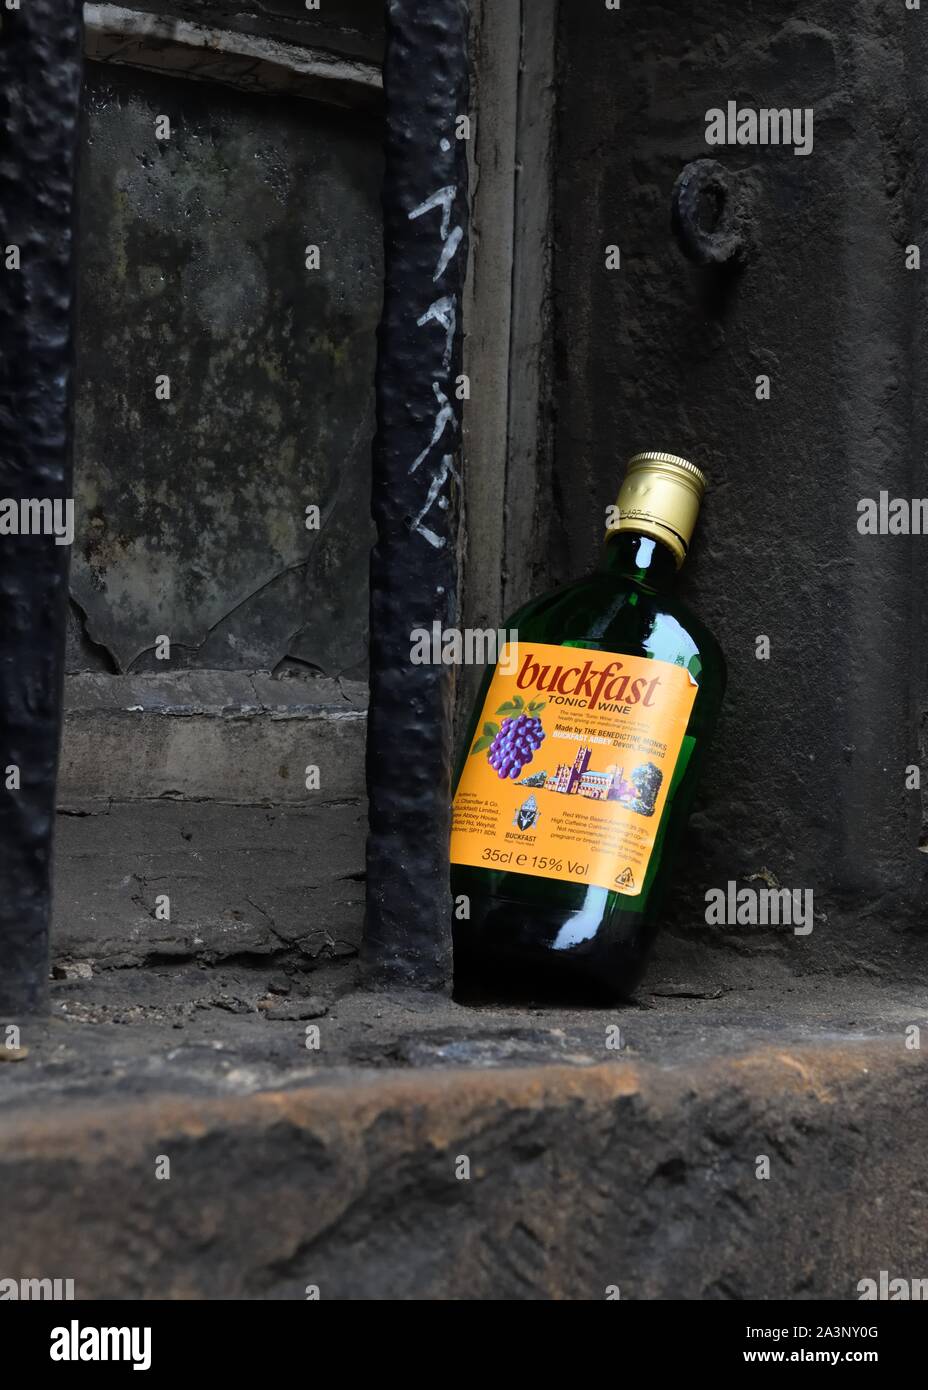 An empty half bottle of the cheap Buckfast wine propped up on an old dirty window ledge in Edinburgh, Scotland, UK, Europe Stock Photo